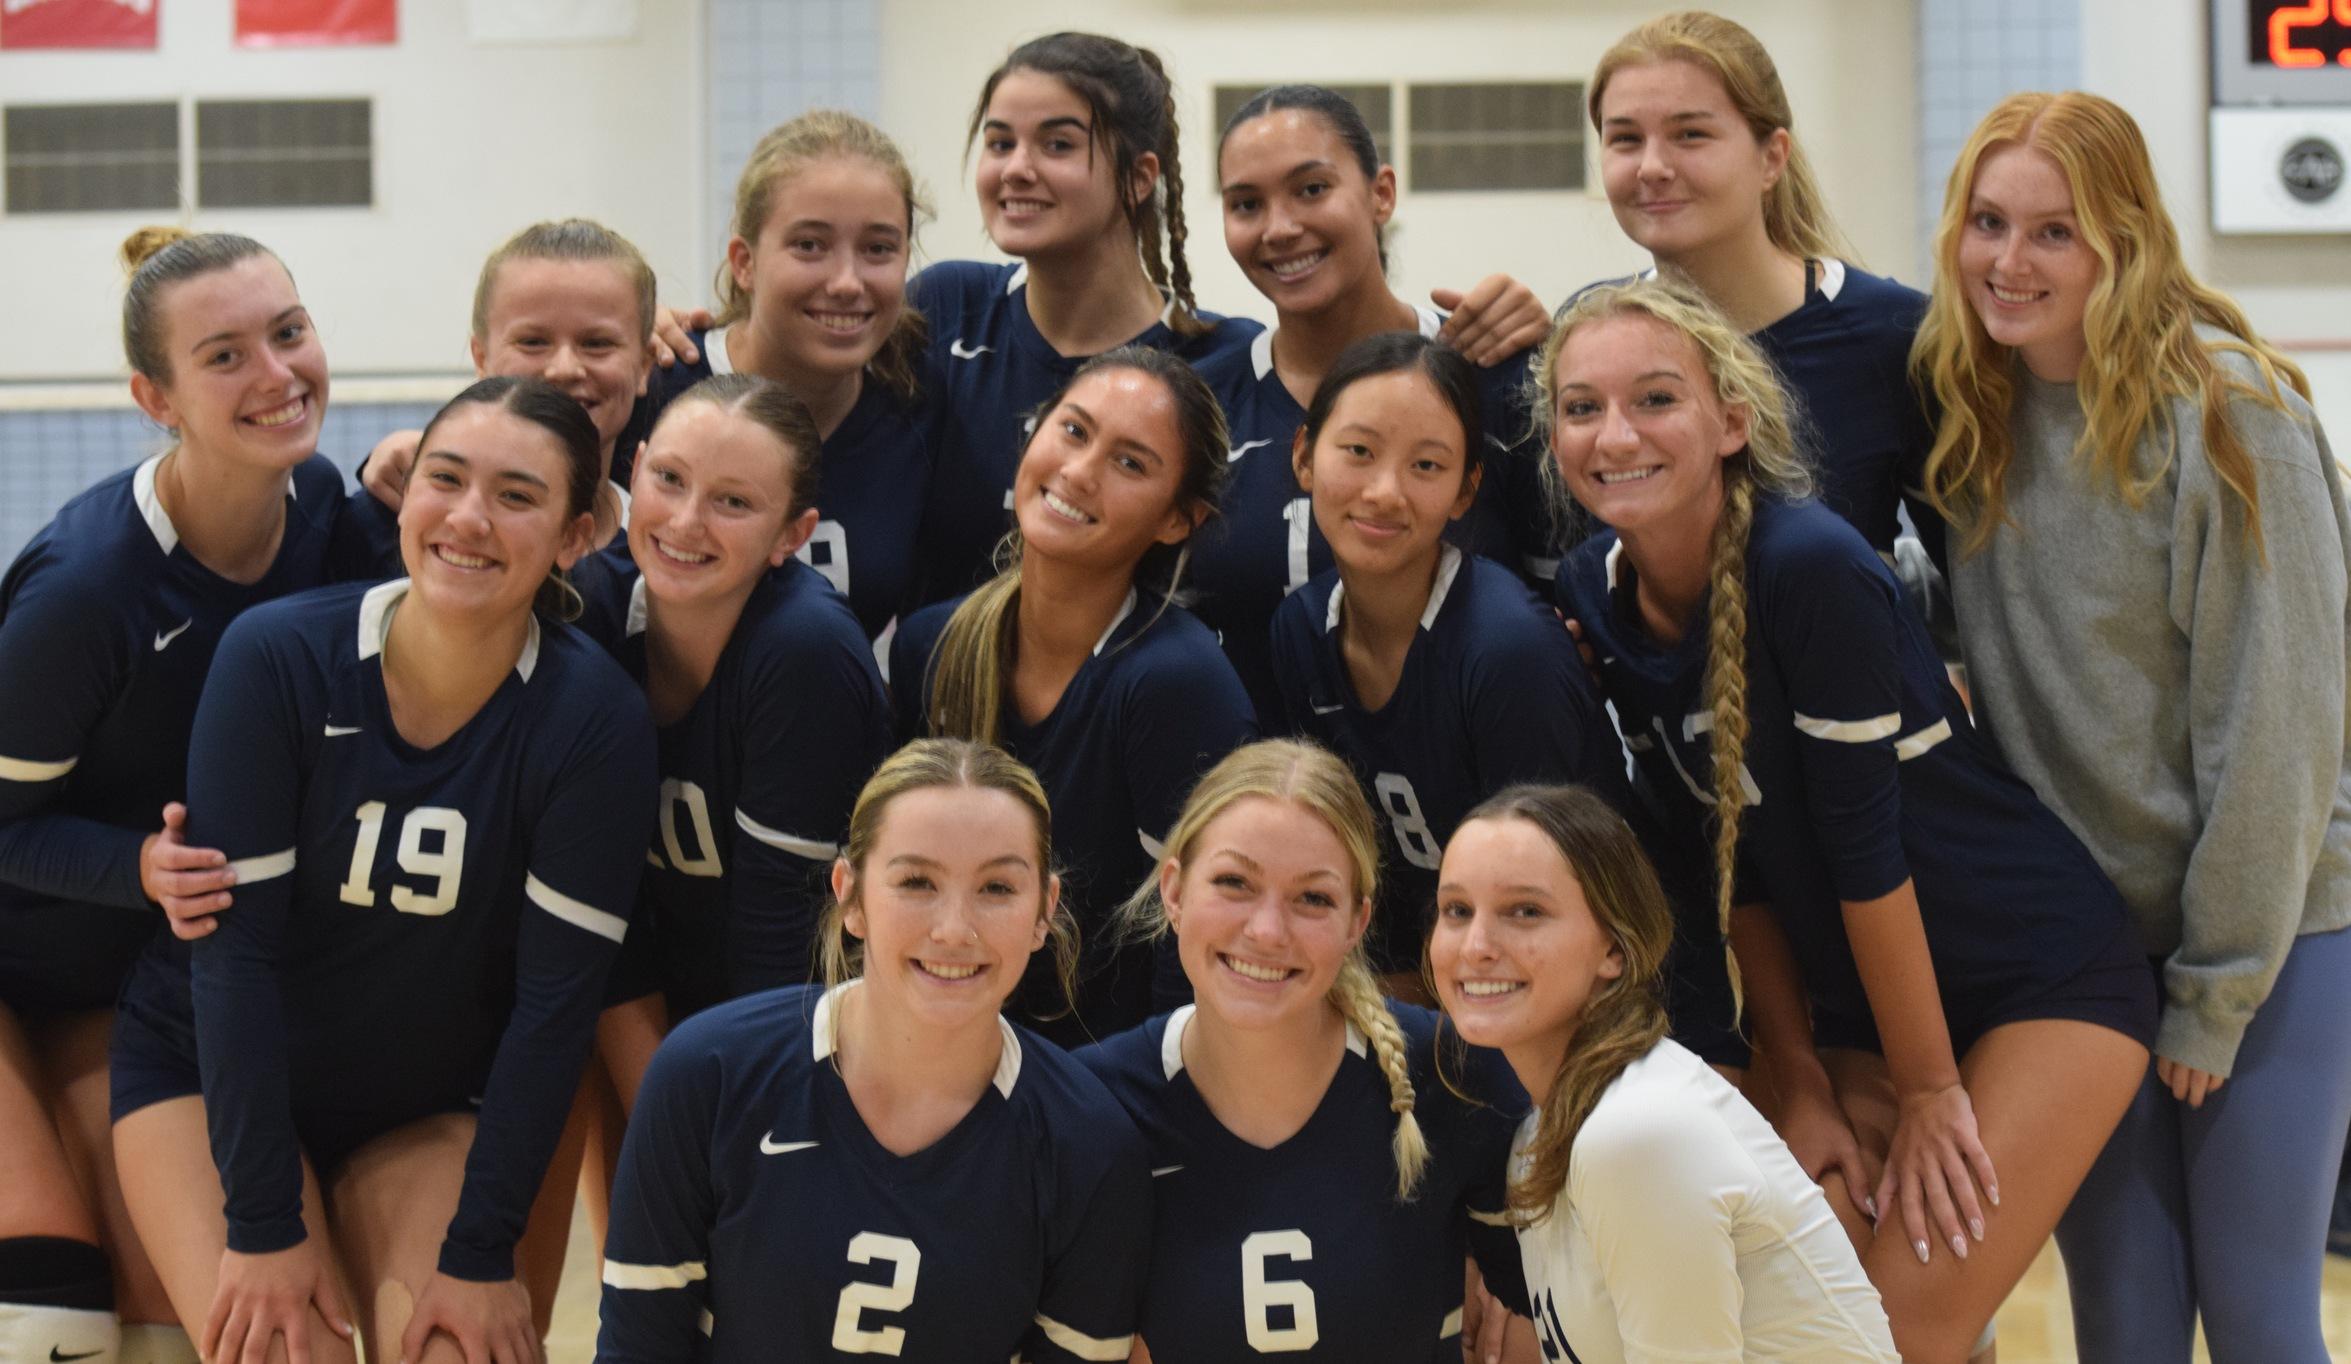 Women's volleyball team ready to take on OCC Friday night